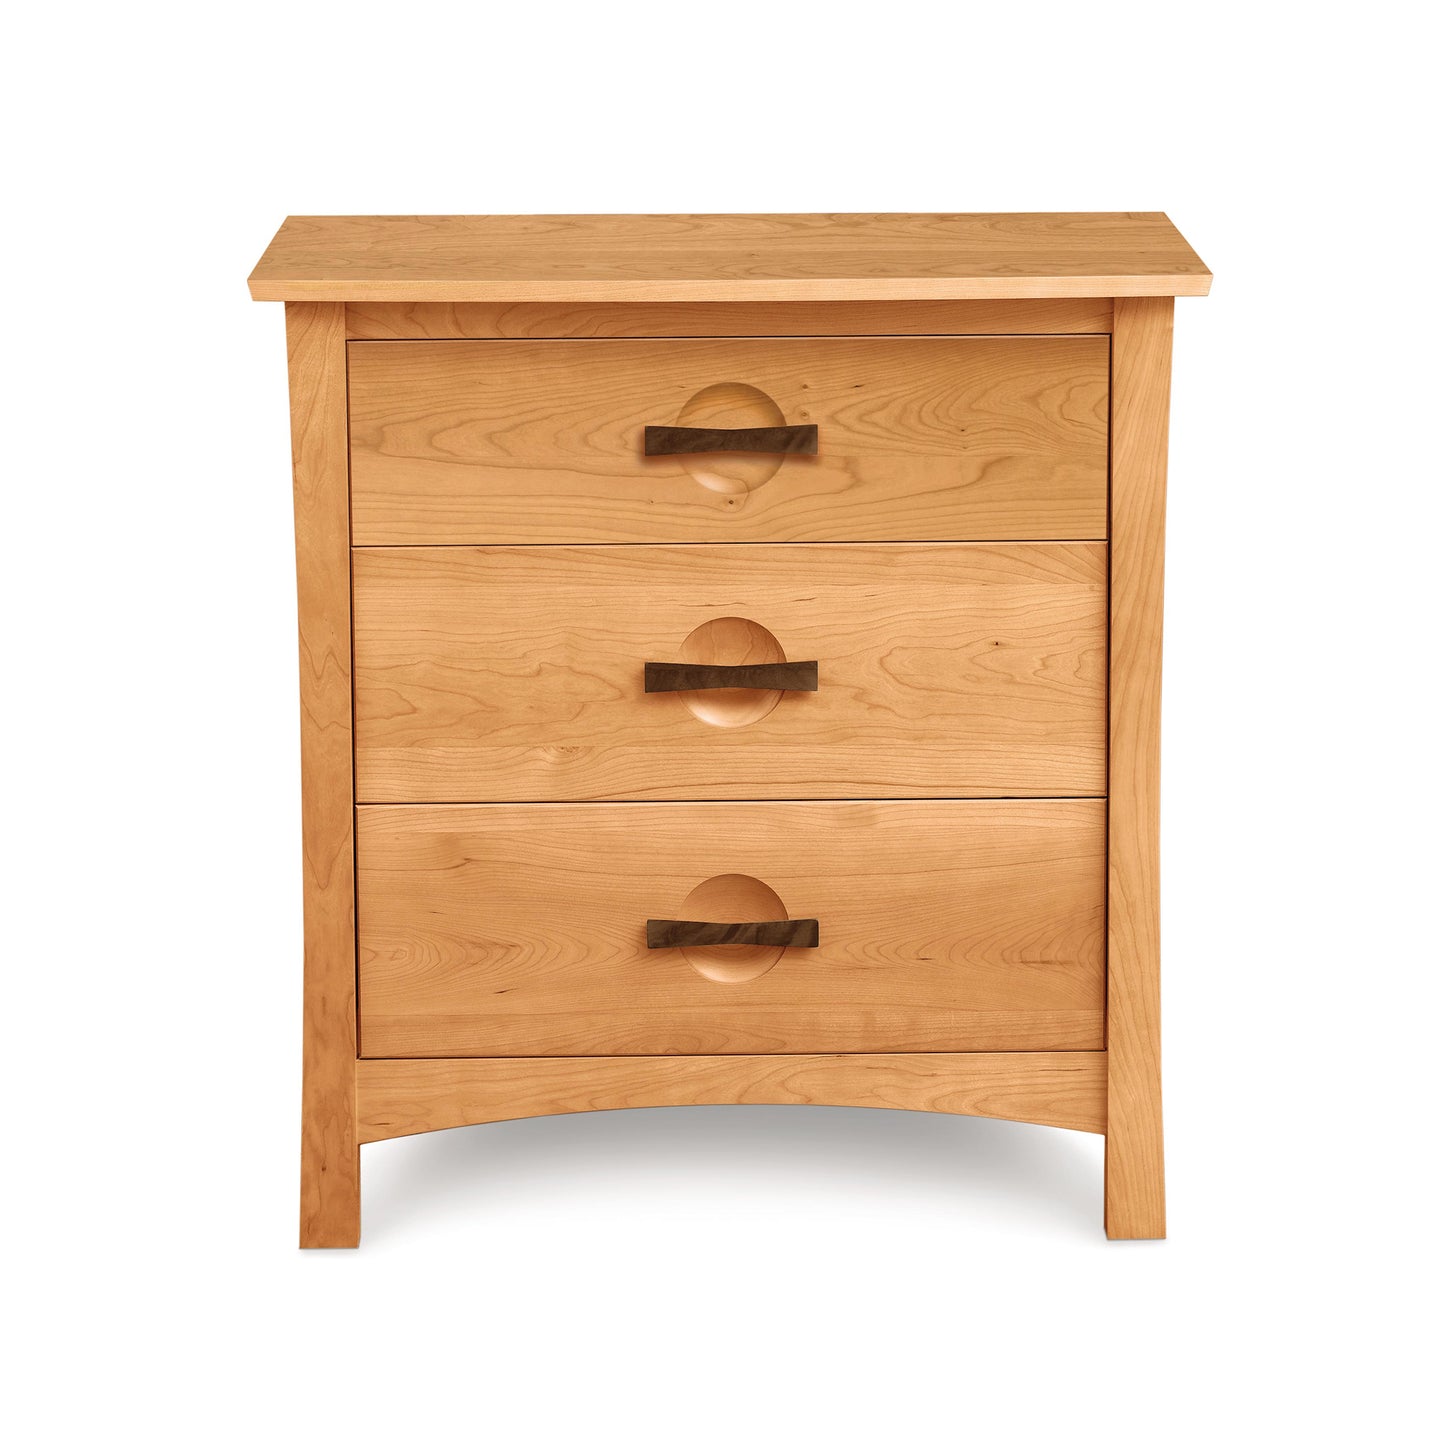 The Copeland Berkeley Bedroom Furniture Collection features a Berkeley 3-Drawer Chest with two drawers.